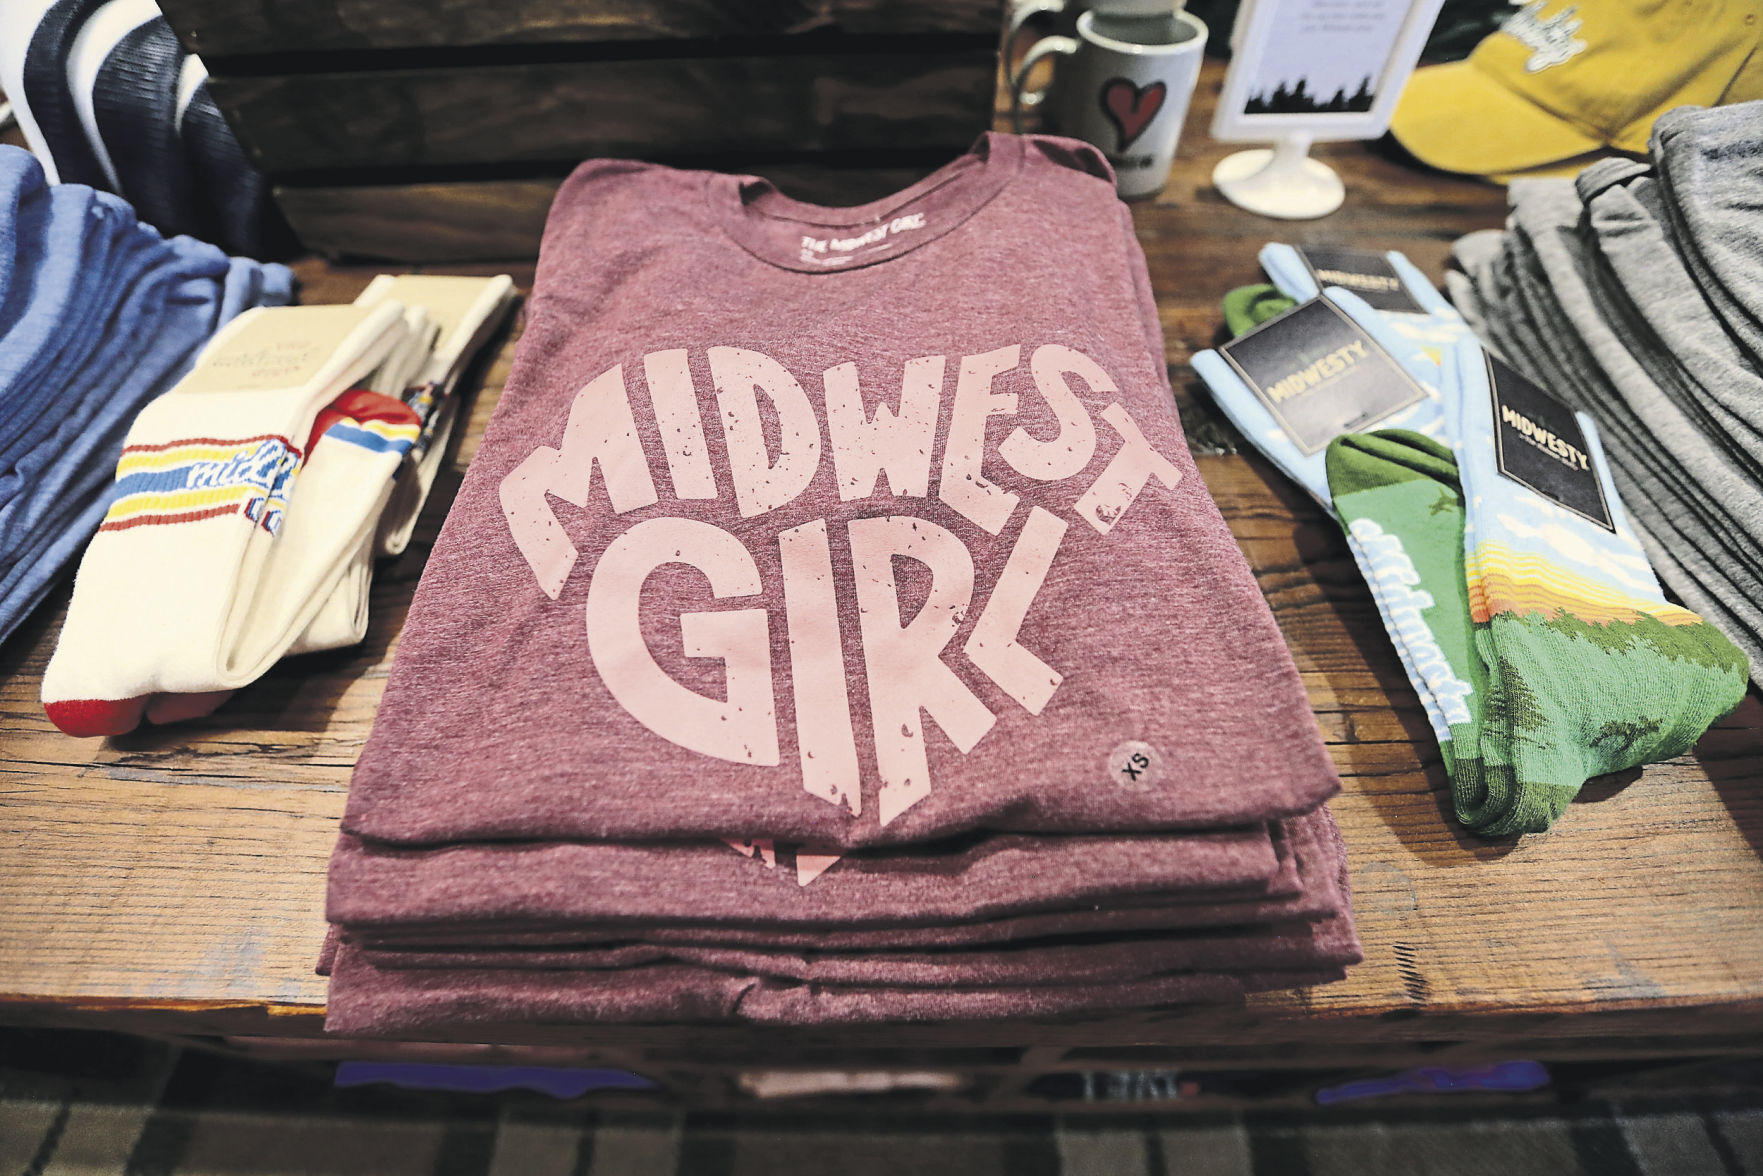 Merchandise is displayed at The Midwest Girl.    PHOTO CREDIT: Jessica Reilly